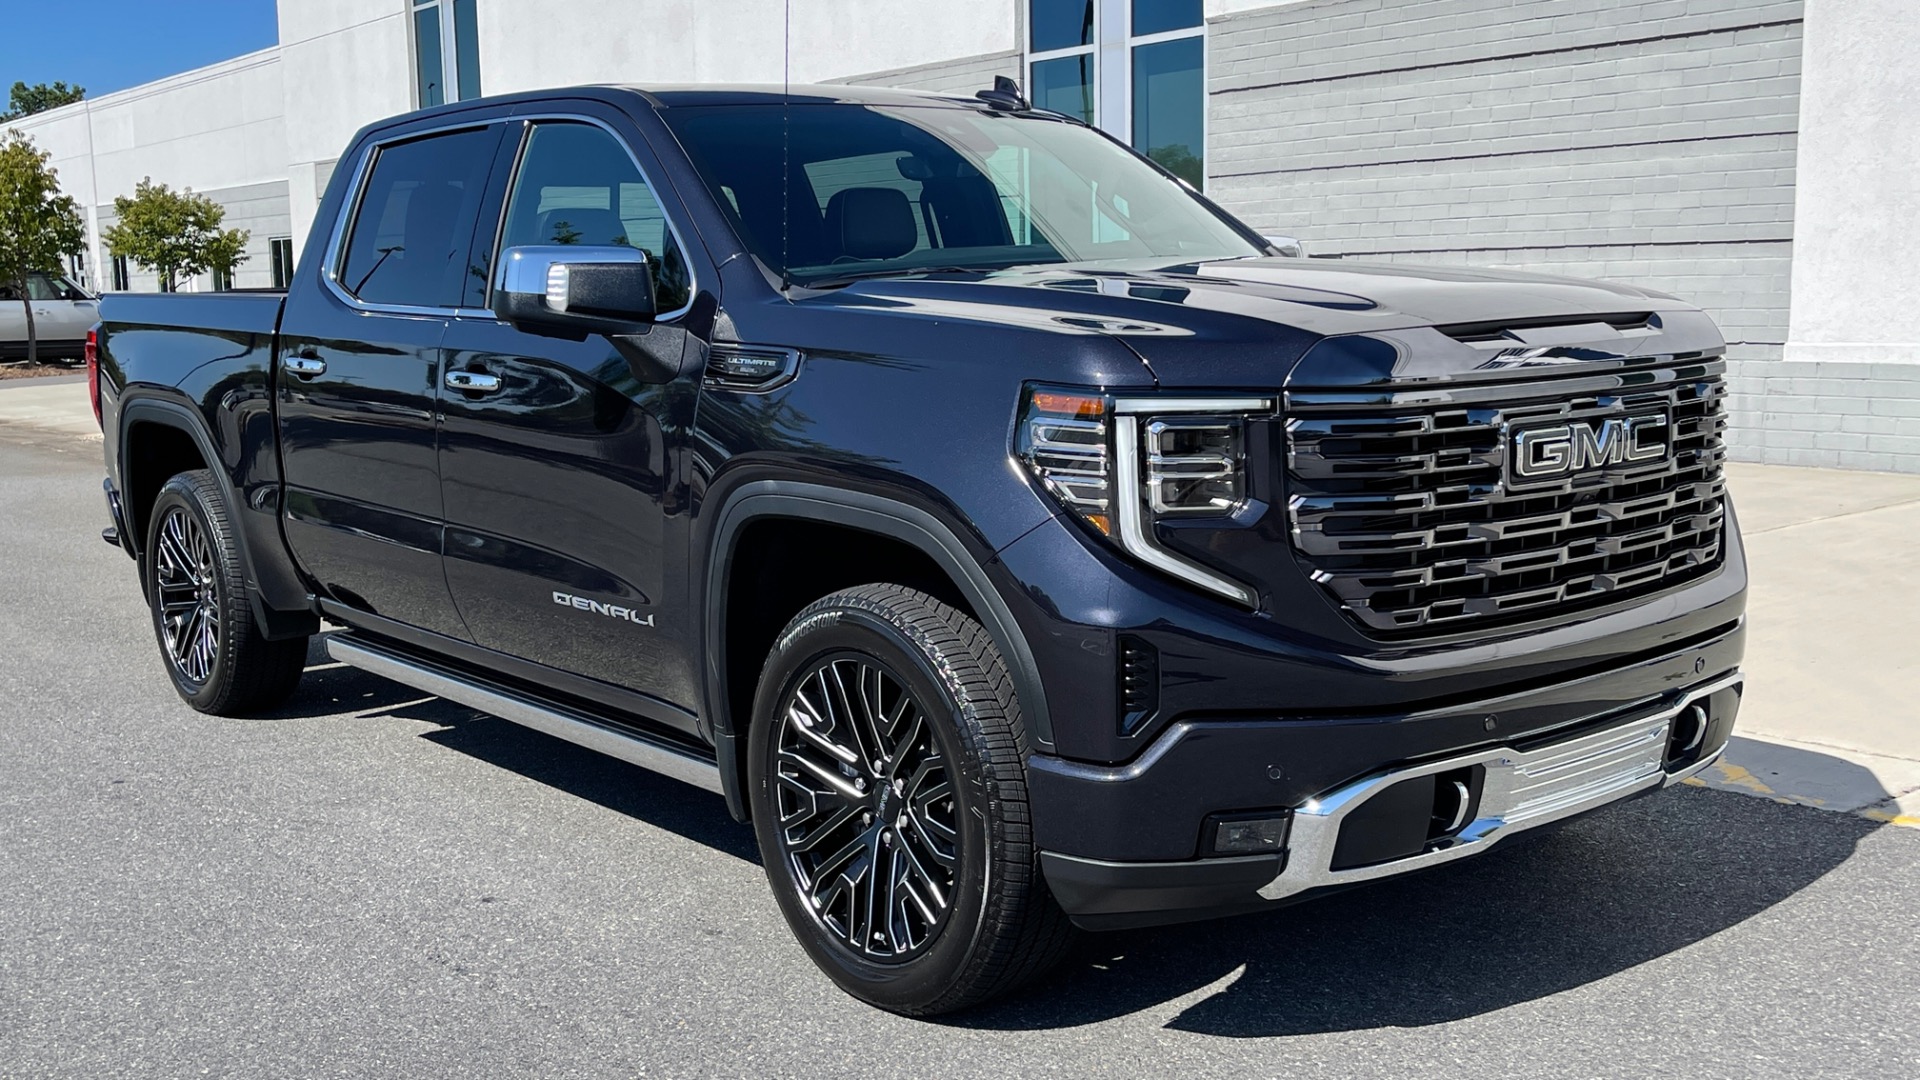 Used 2022 GMC Sierra 1500 DENALI ULTIMATE / 6.2L V8 / 22IN WHEELS / LEATHER / COOLED SEATS for sale $110,500 at Formula Imports in Charlotte NC 28227 8